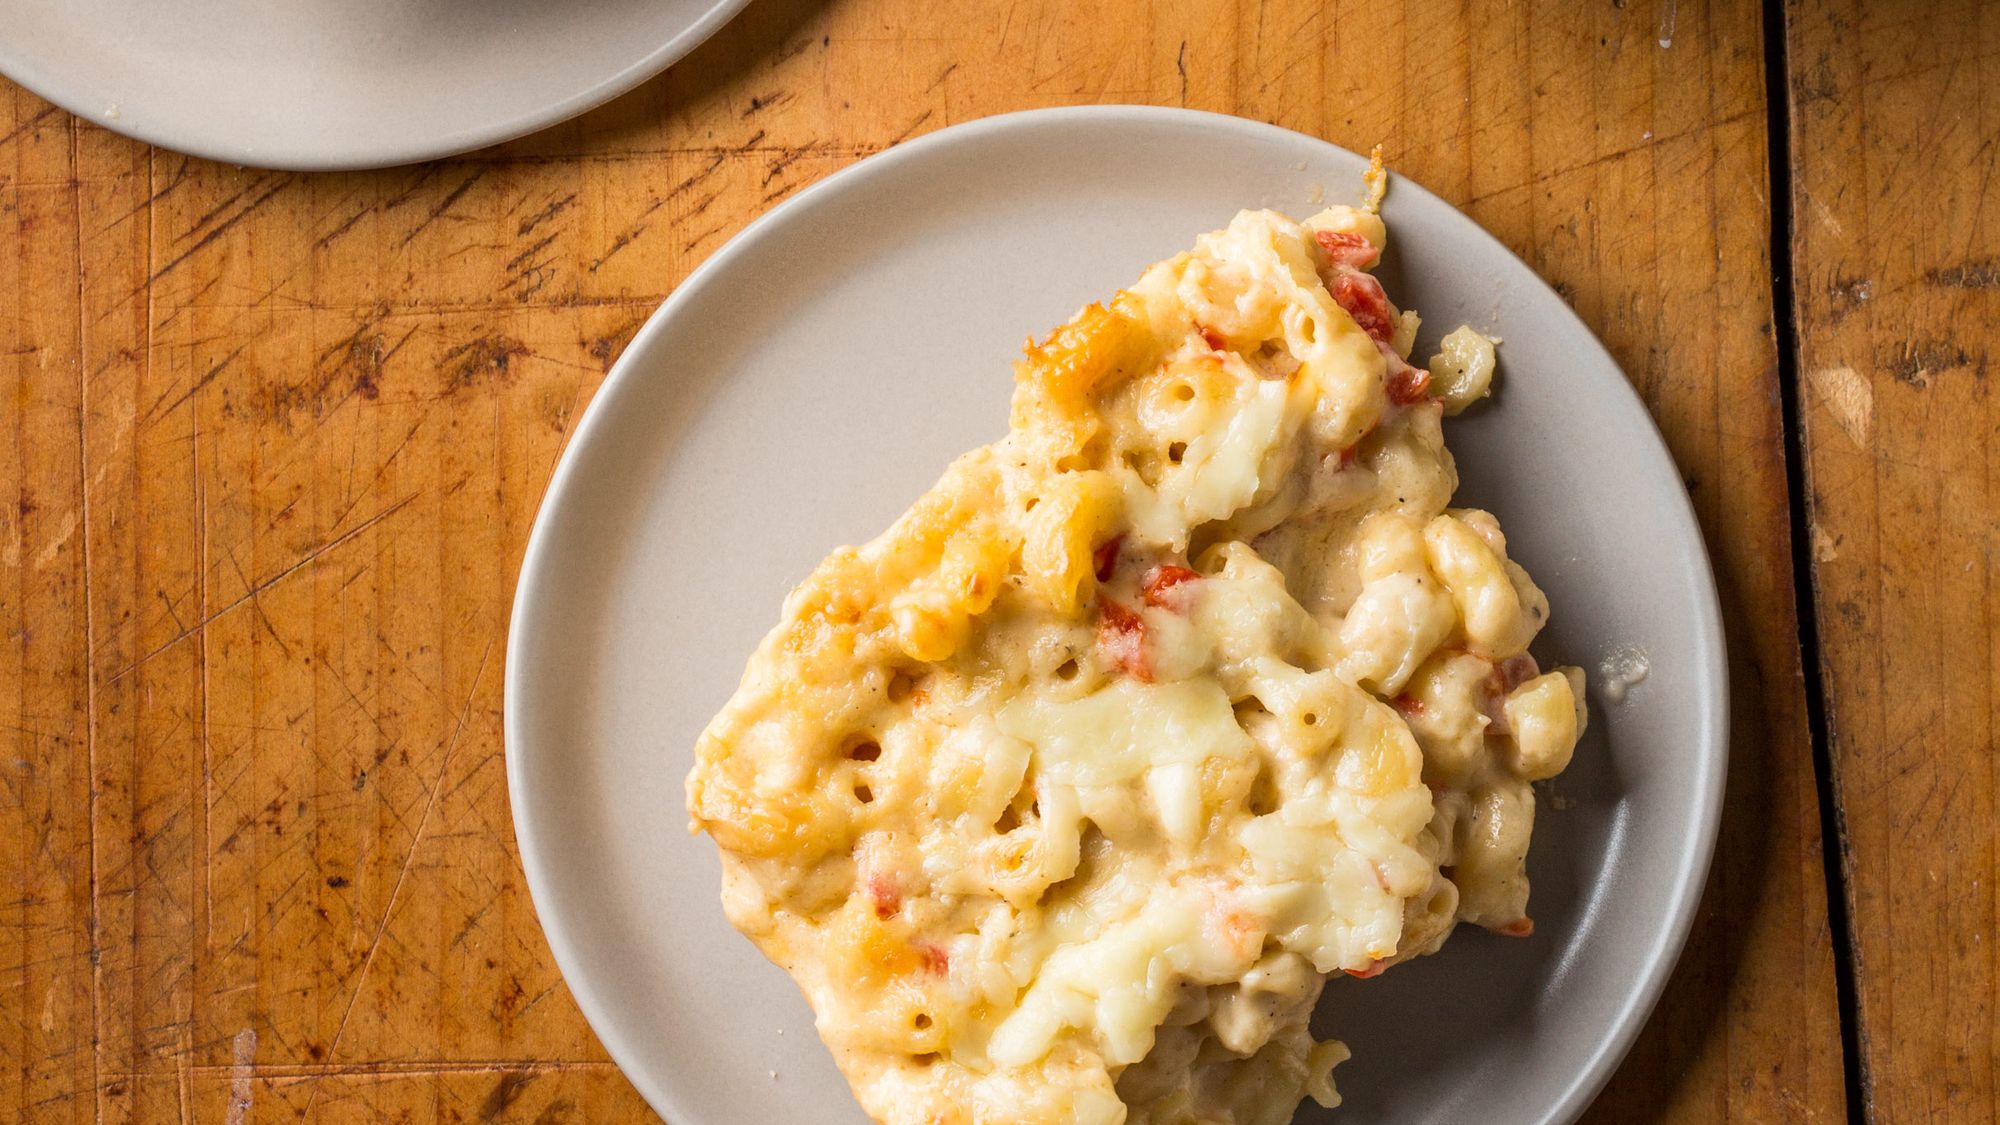 This new spin on mac and cheese will become your new favourite side dish